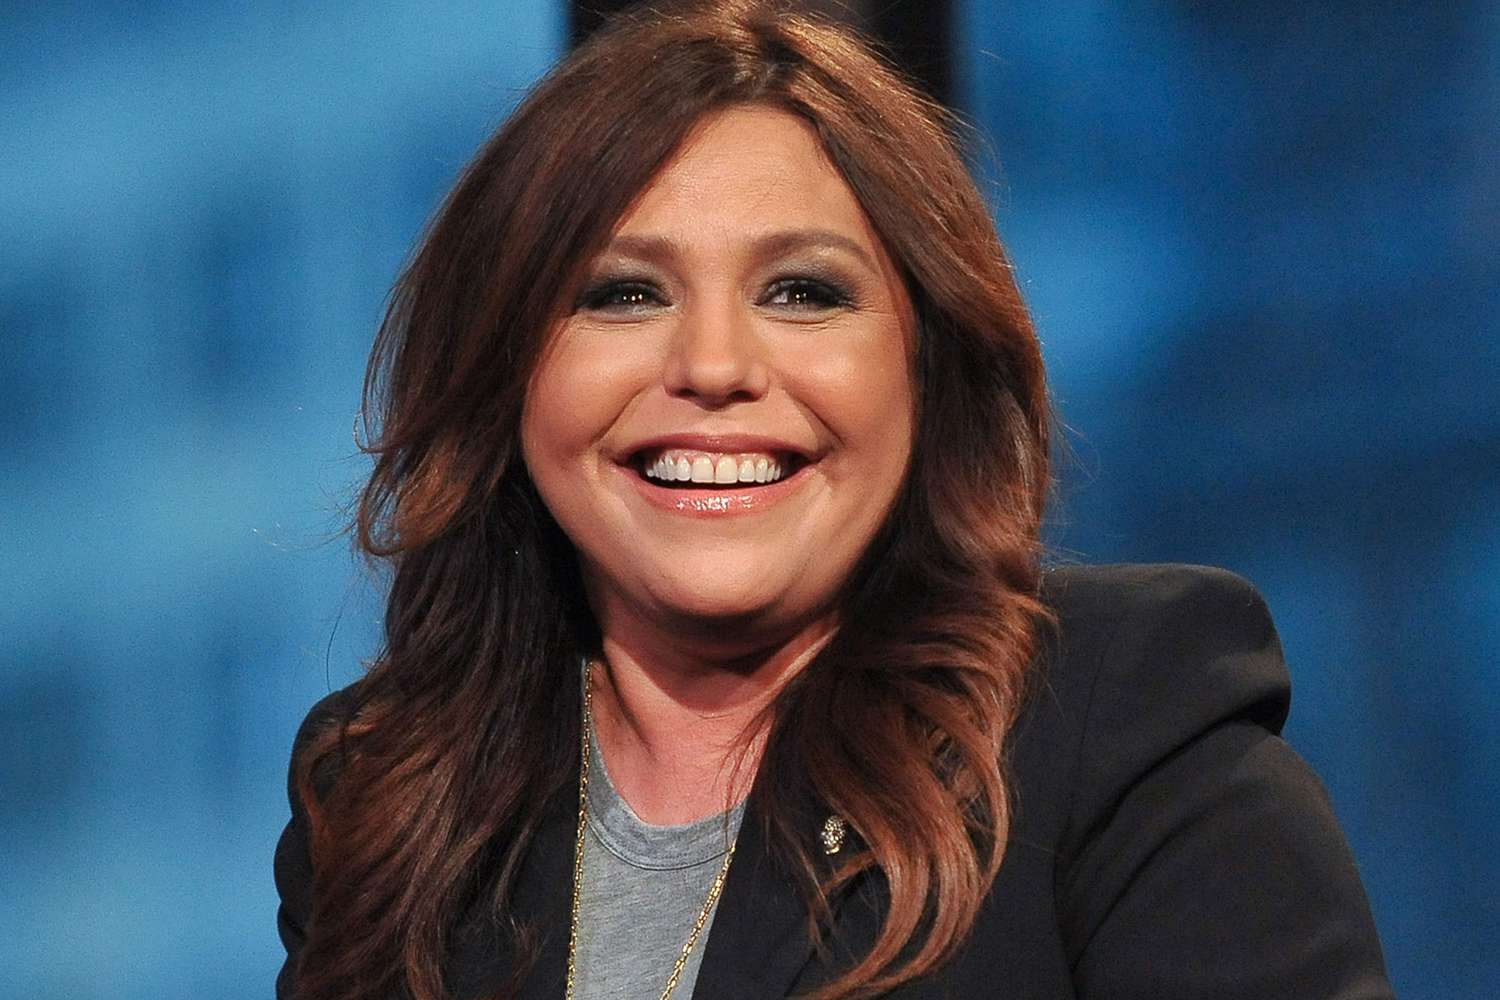 Rachael Ray wearing a black suit with a big smile